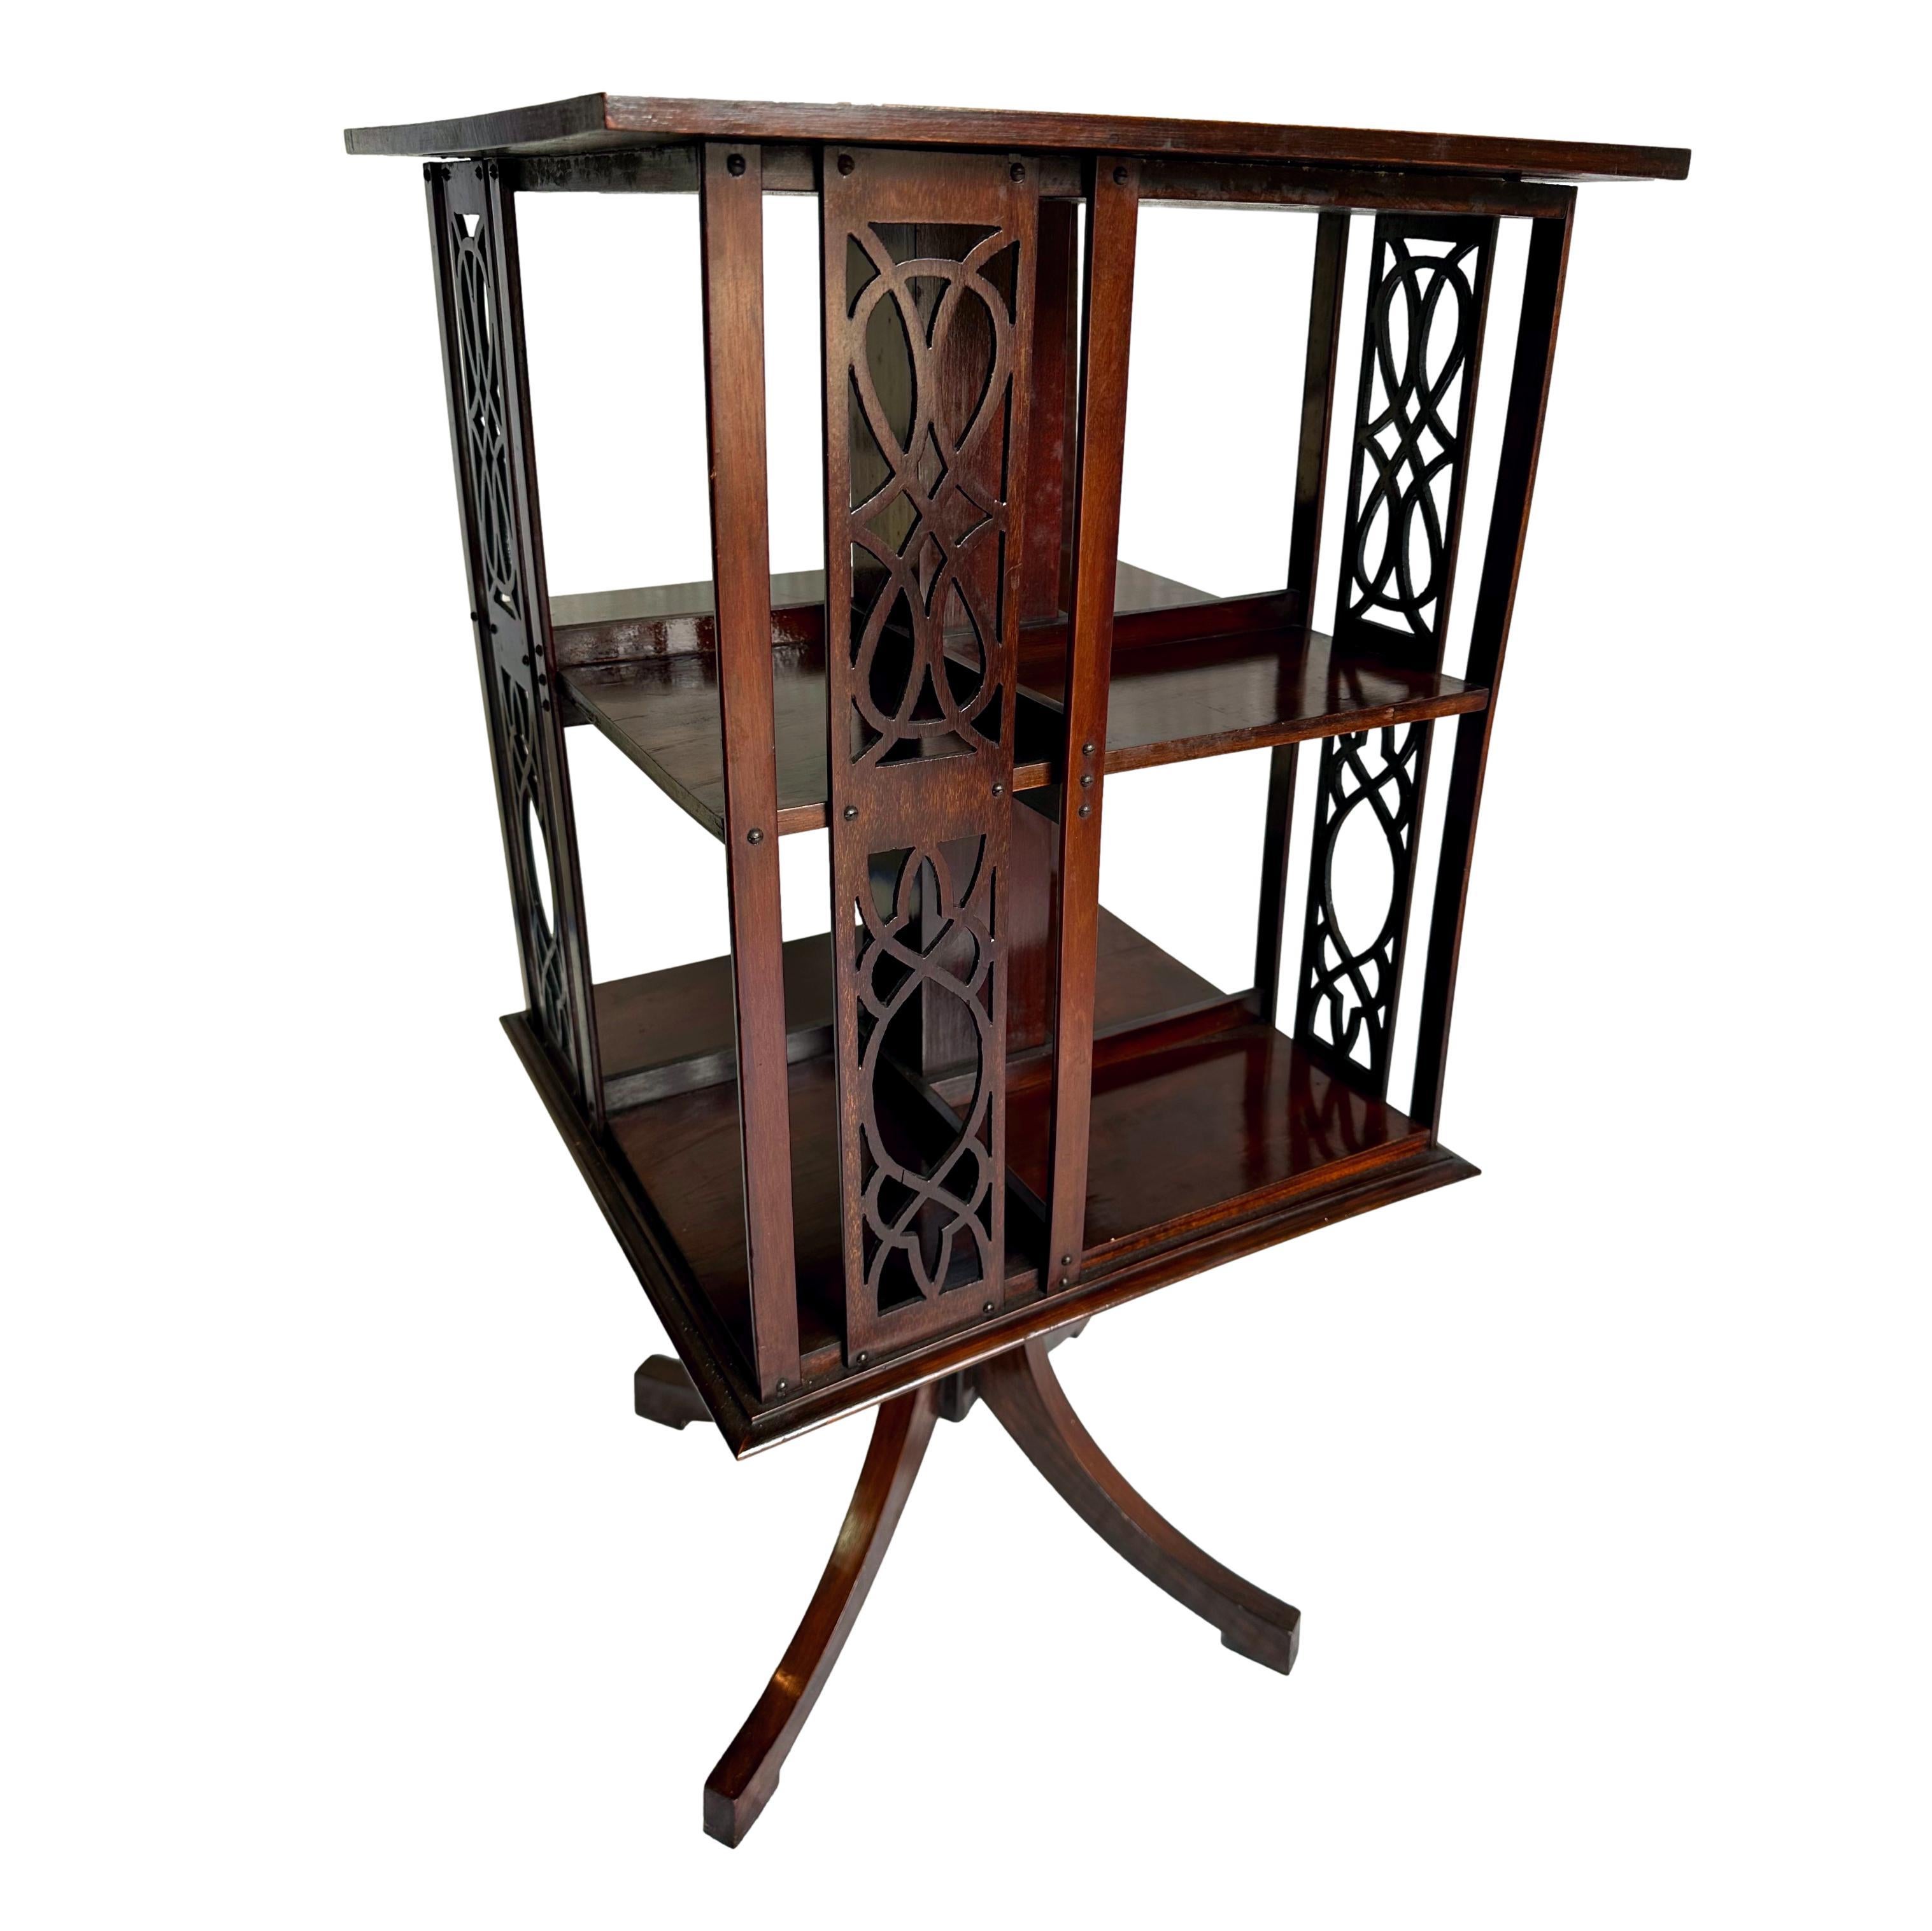 A Mahogany Revolving Bookcase, the figured mahogany top with satinwood banding, with Chippendale-style fretwork side panels, on a revolving tripod base, English, ca. 1900.  